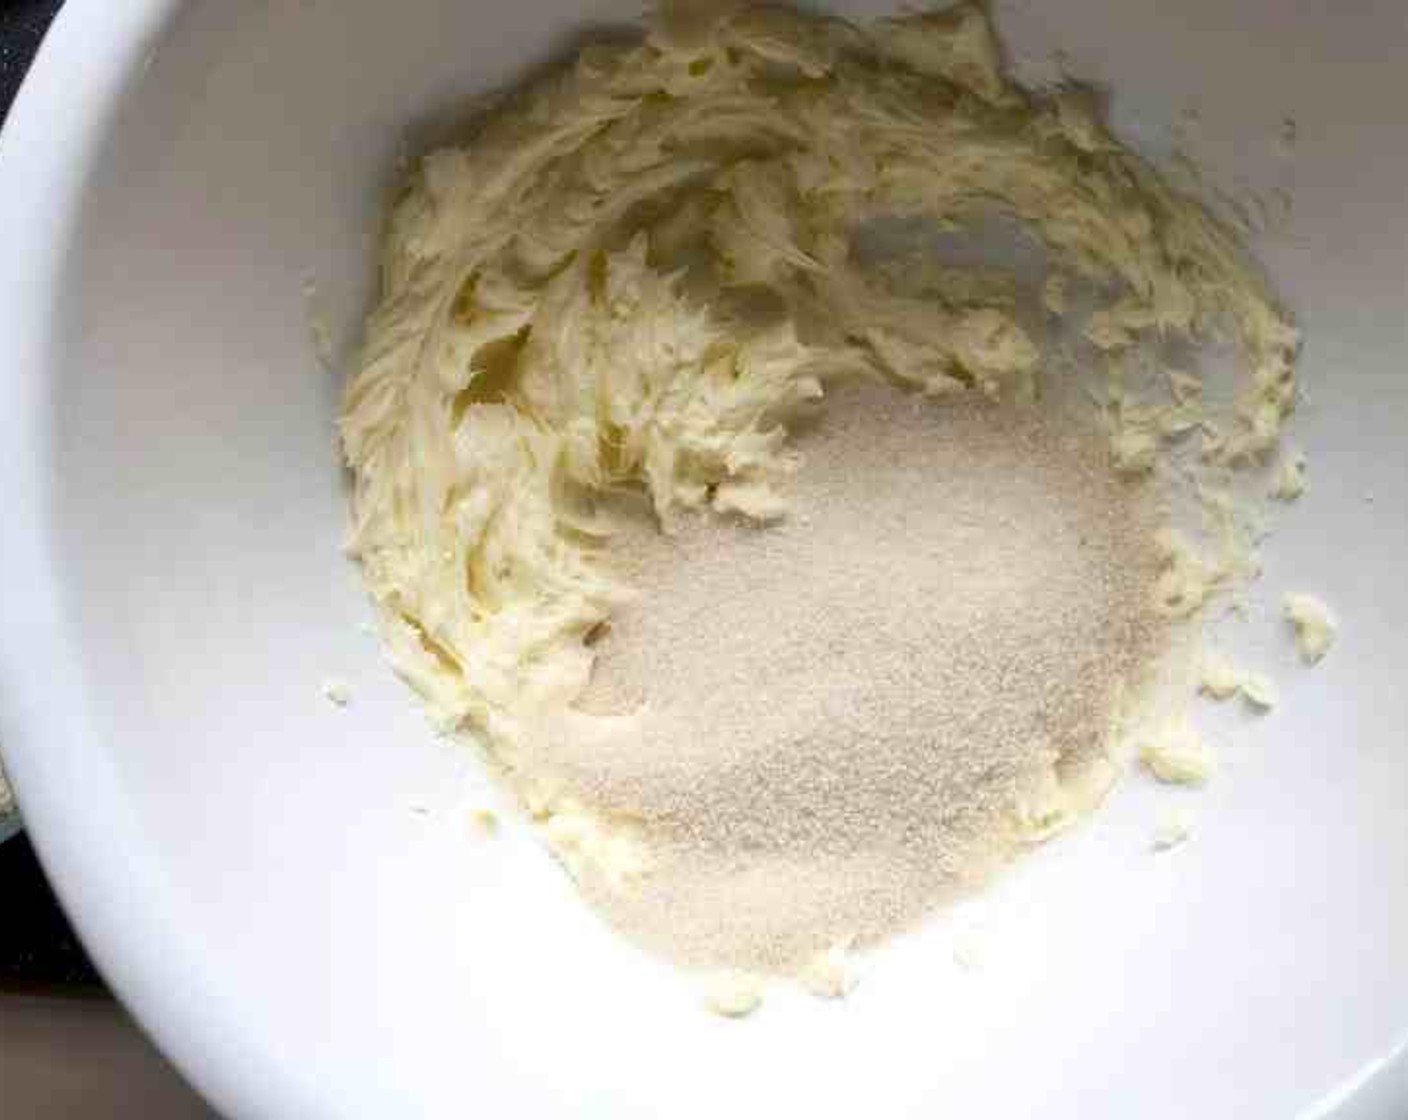 step 2 In the bowl of an electric mixer fitted with the paddle attachment, beat the Butter (3/4 cup) until creamy. Gradually add the Granulated Sugar (1 1/4 cups) and continue beating until light and fluffy.